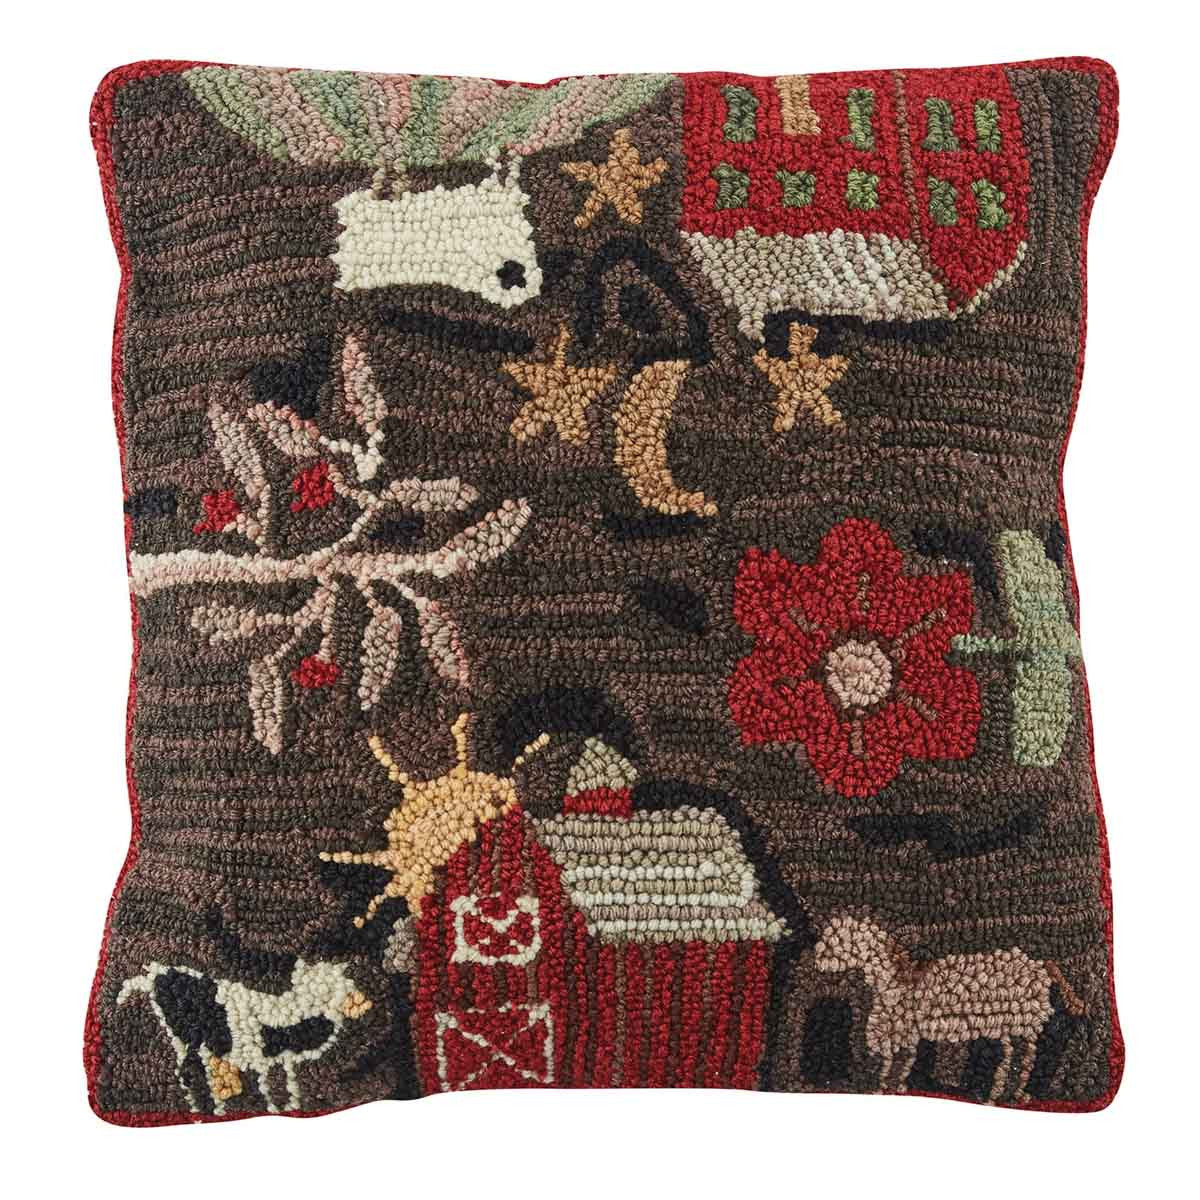 Farm Life Hooked Pillow Set Down Feather Fill 18"x18" - Park Designs